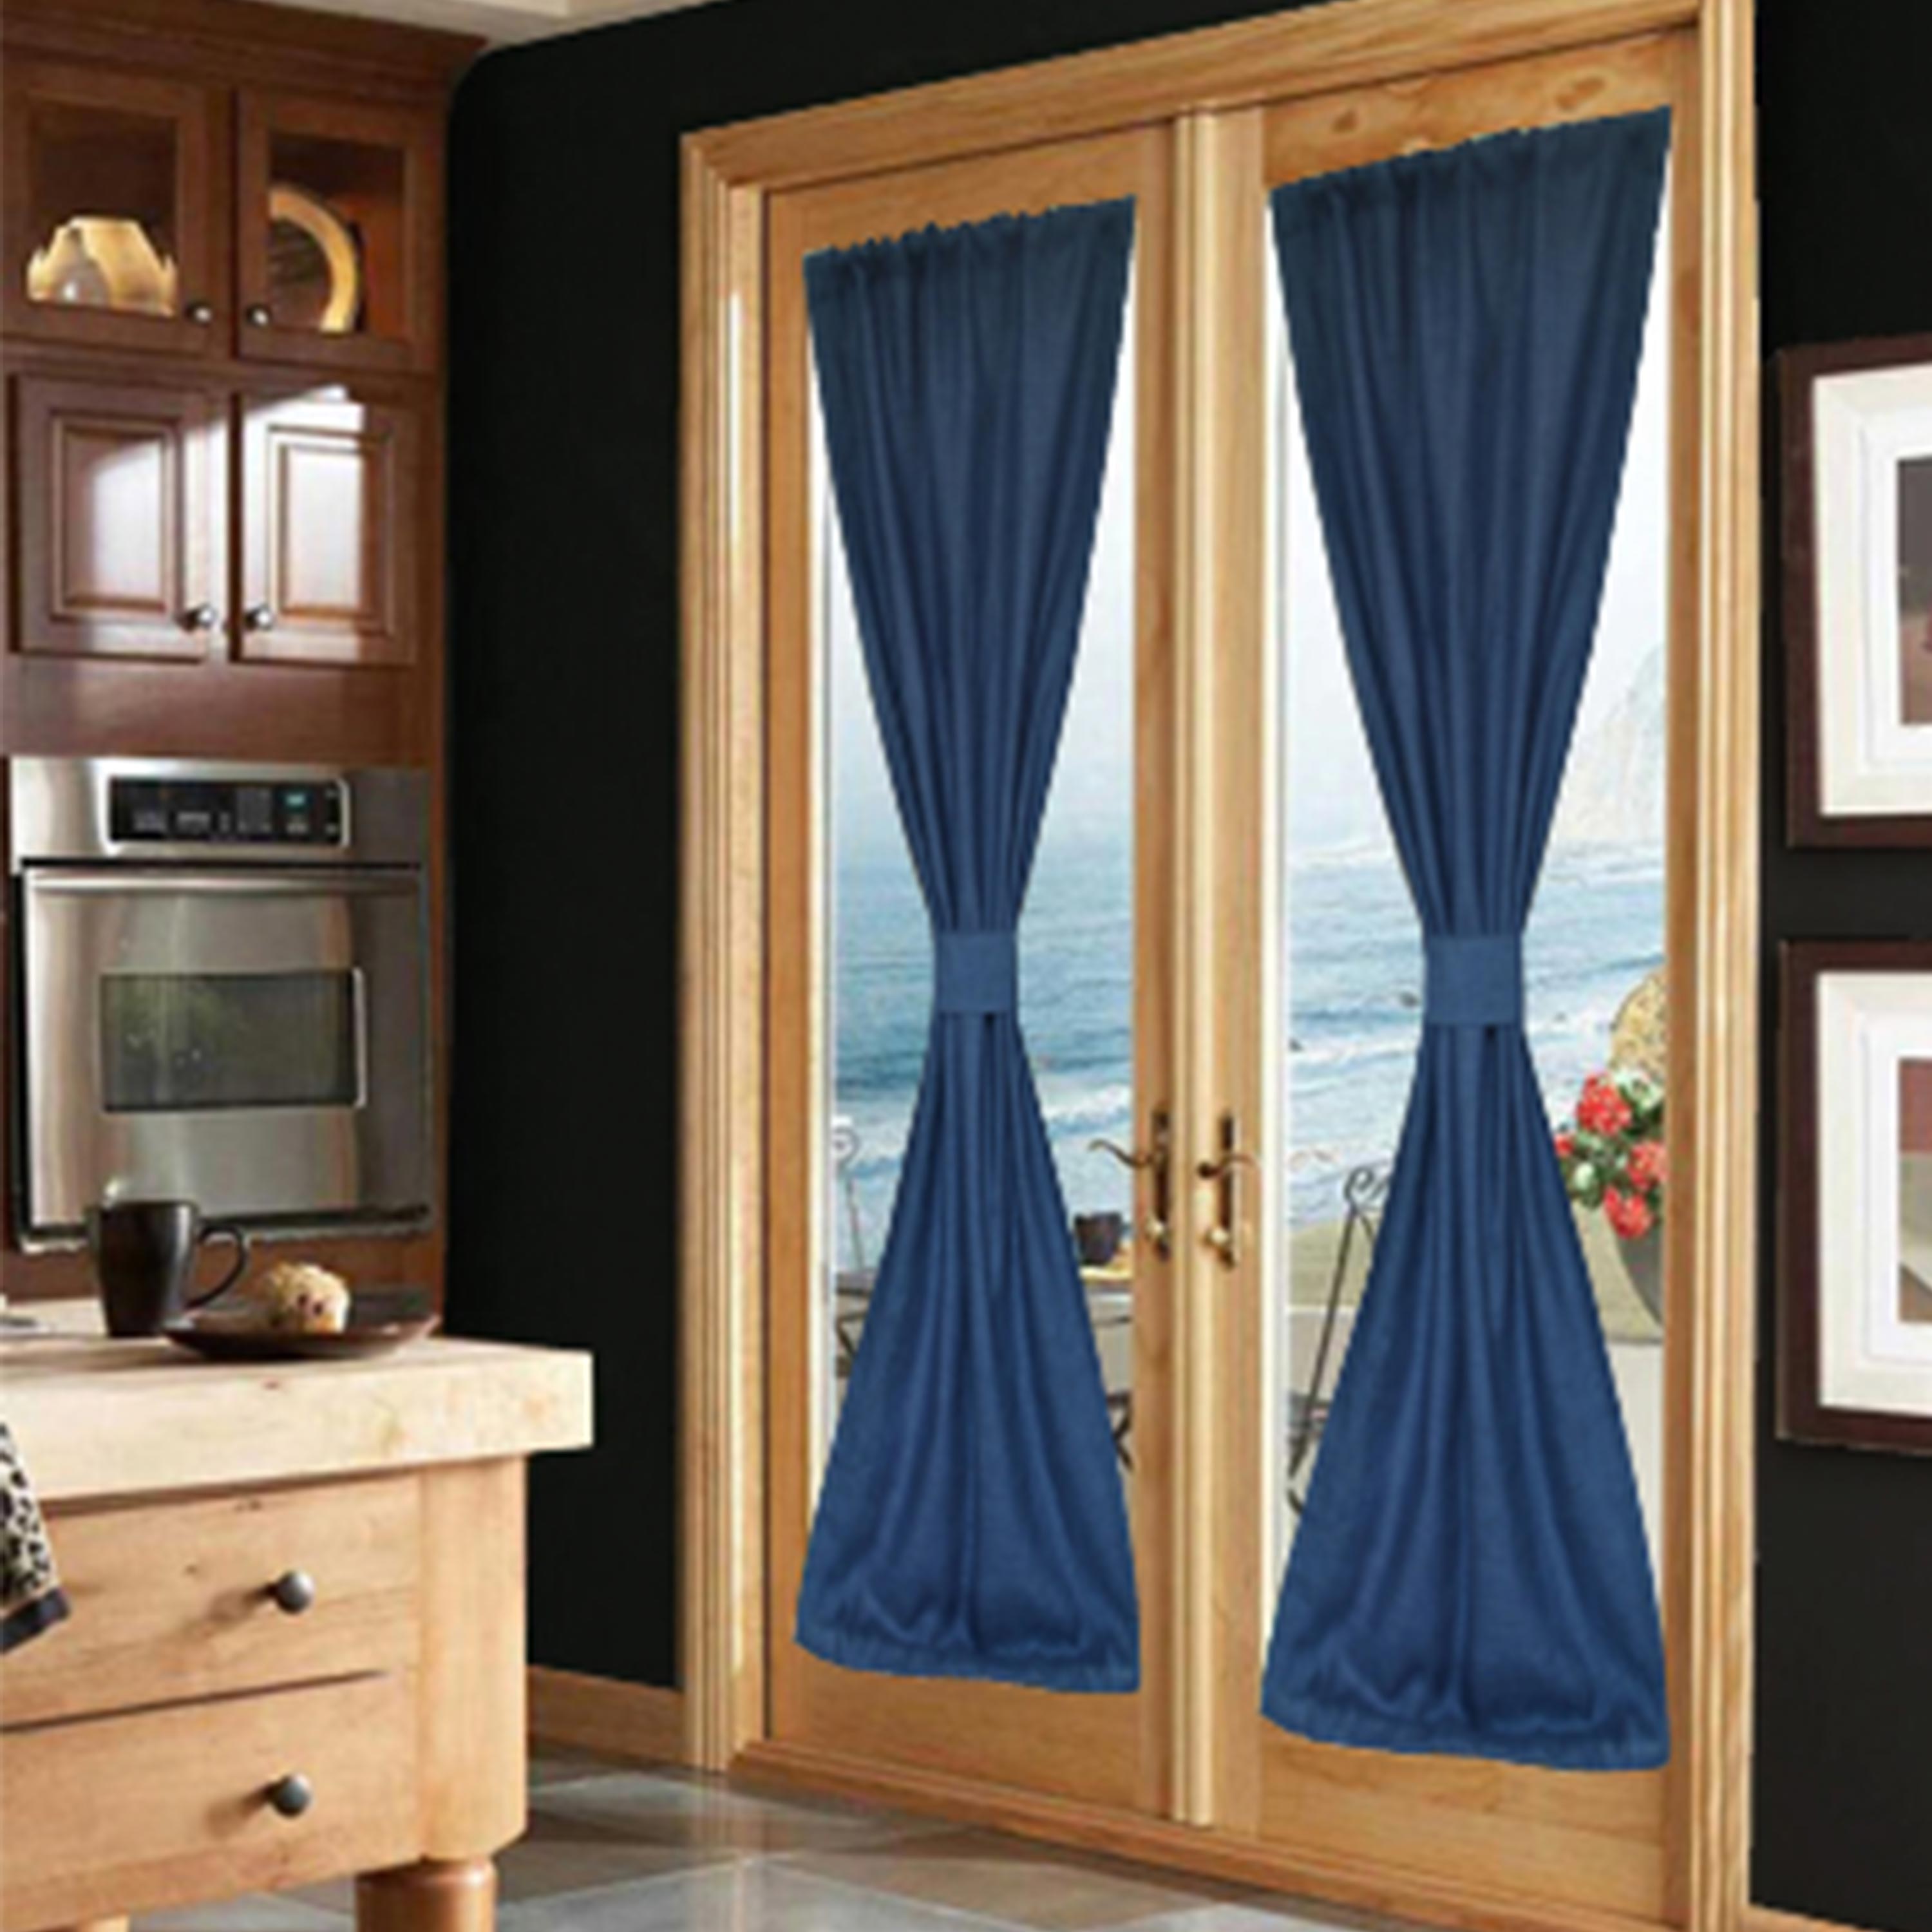 Custom French Door Burlap Curtains With Ties Burlap Drapes With Ties Window Treatment